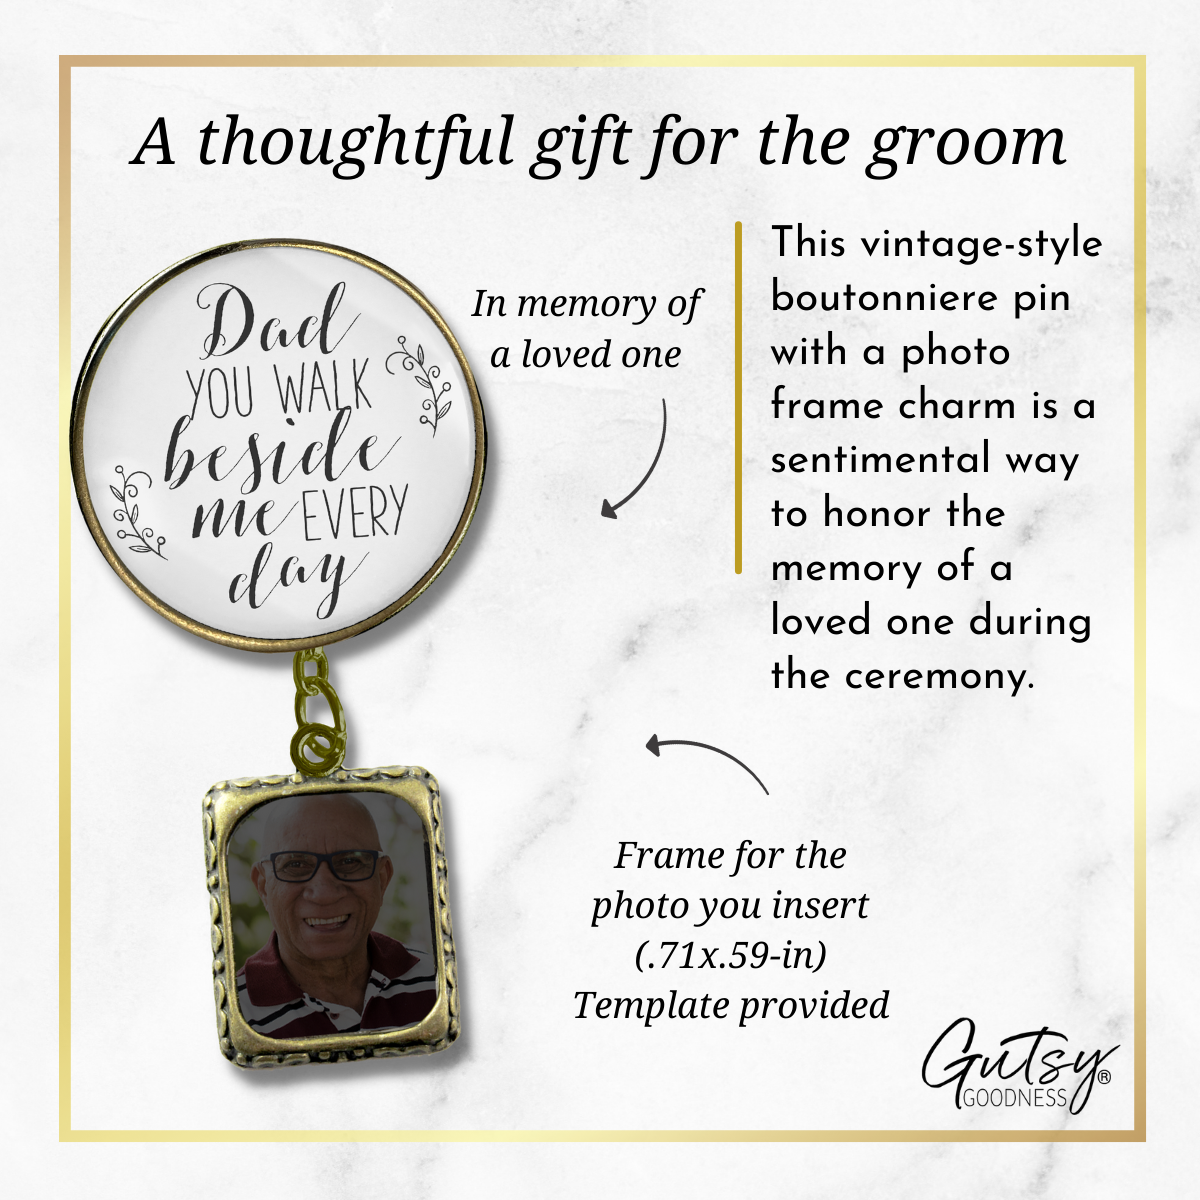 Wedding Memorial Boutonniere Pin Photo Frame Honor Father Dad Vintage White For Men - Gutsy Goodness